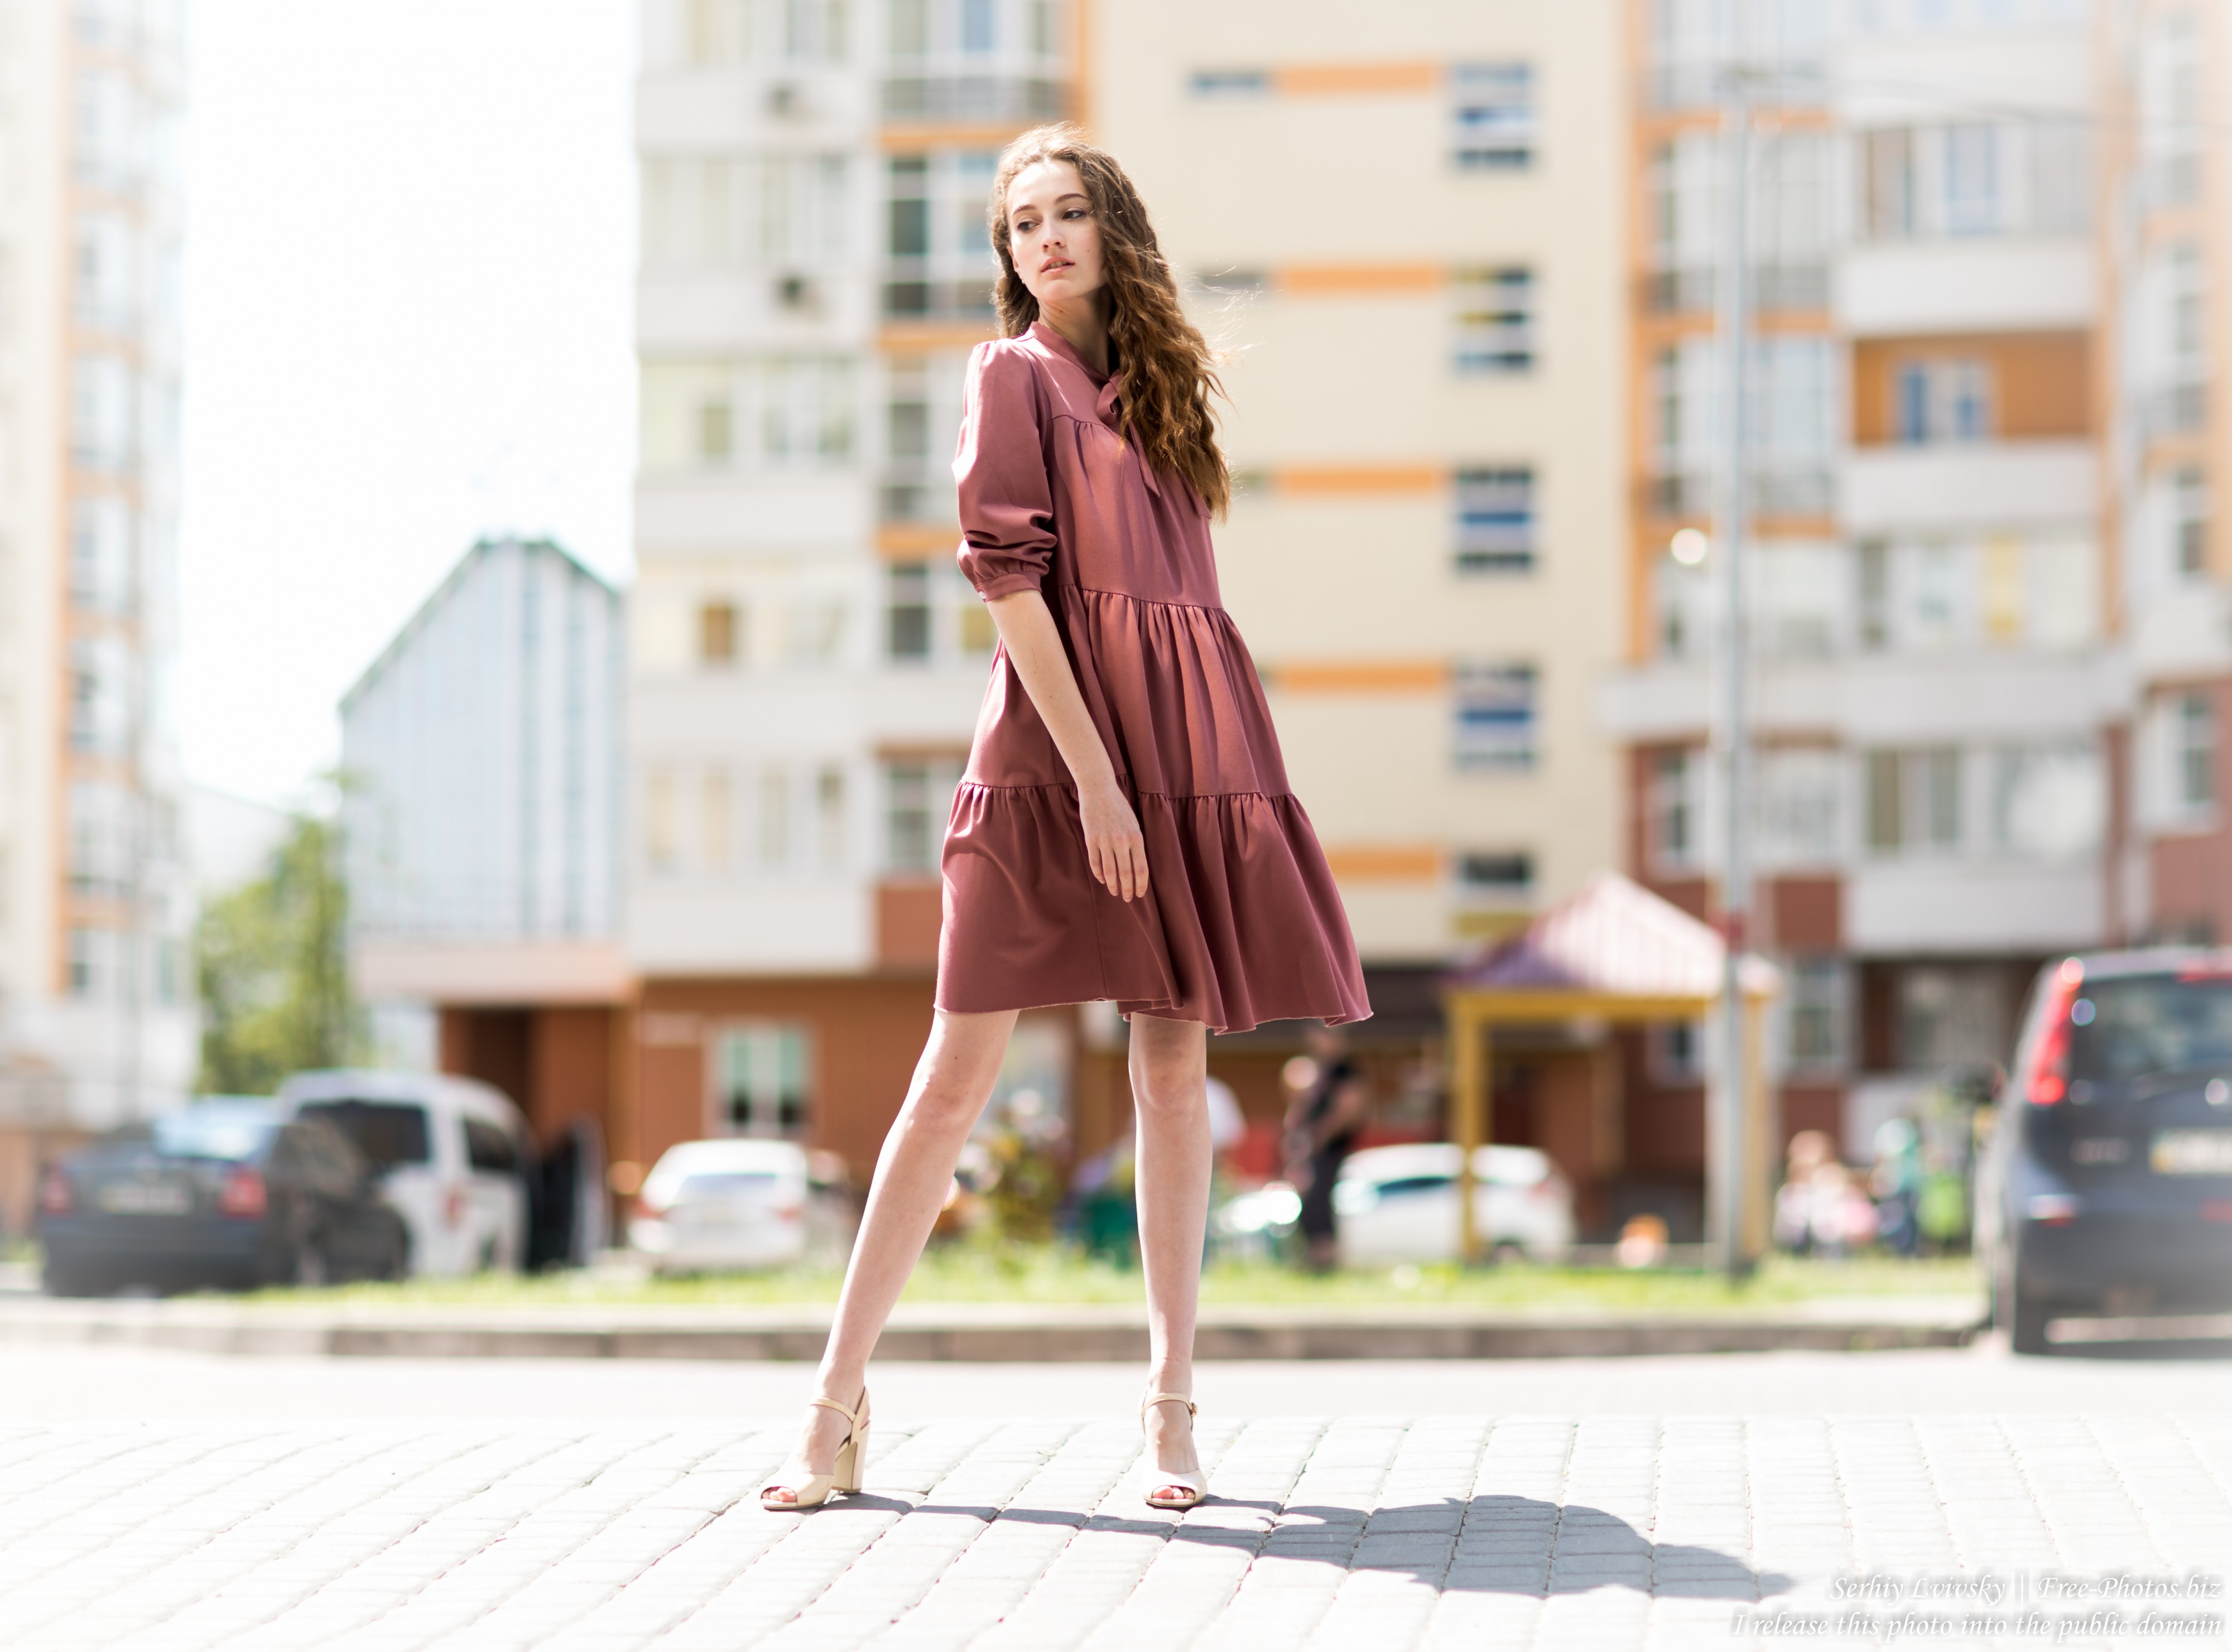 Sophia - a 17-year-old girl photographed in July 2019 by Serhiy Lvivsky, picture 1